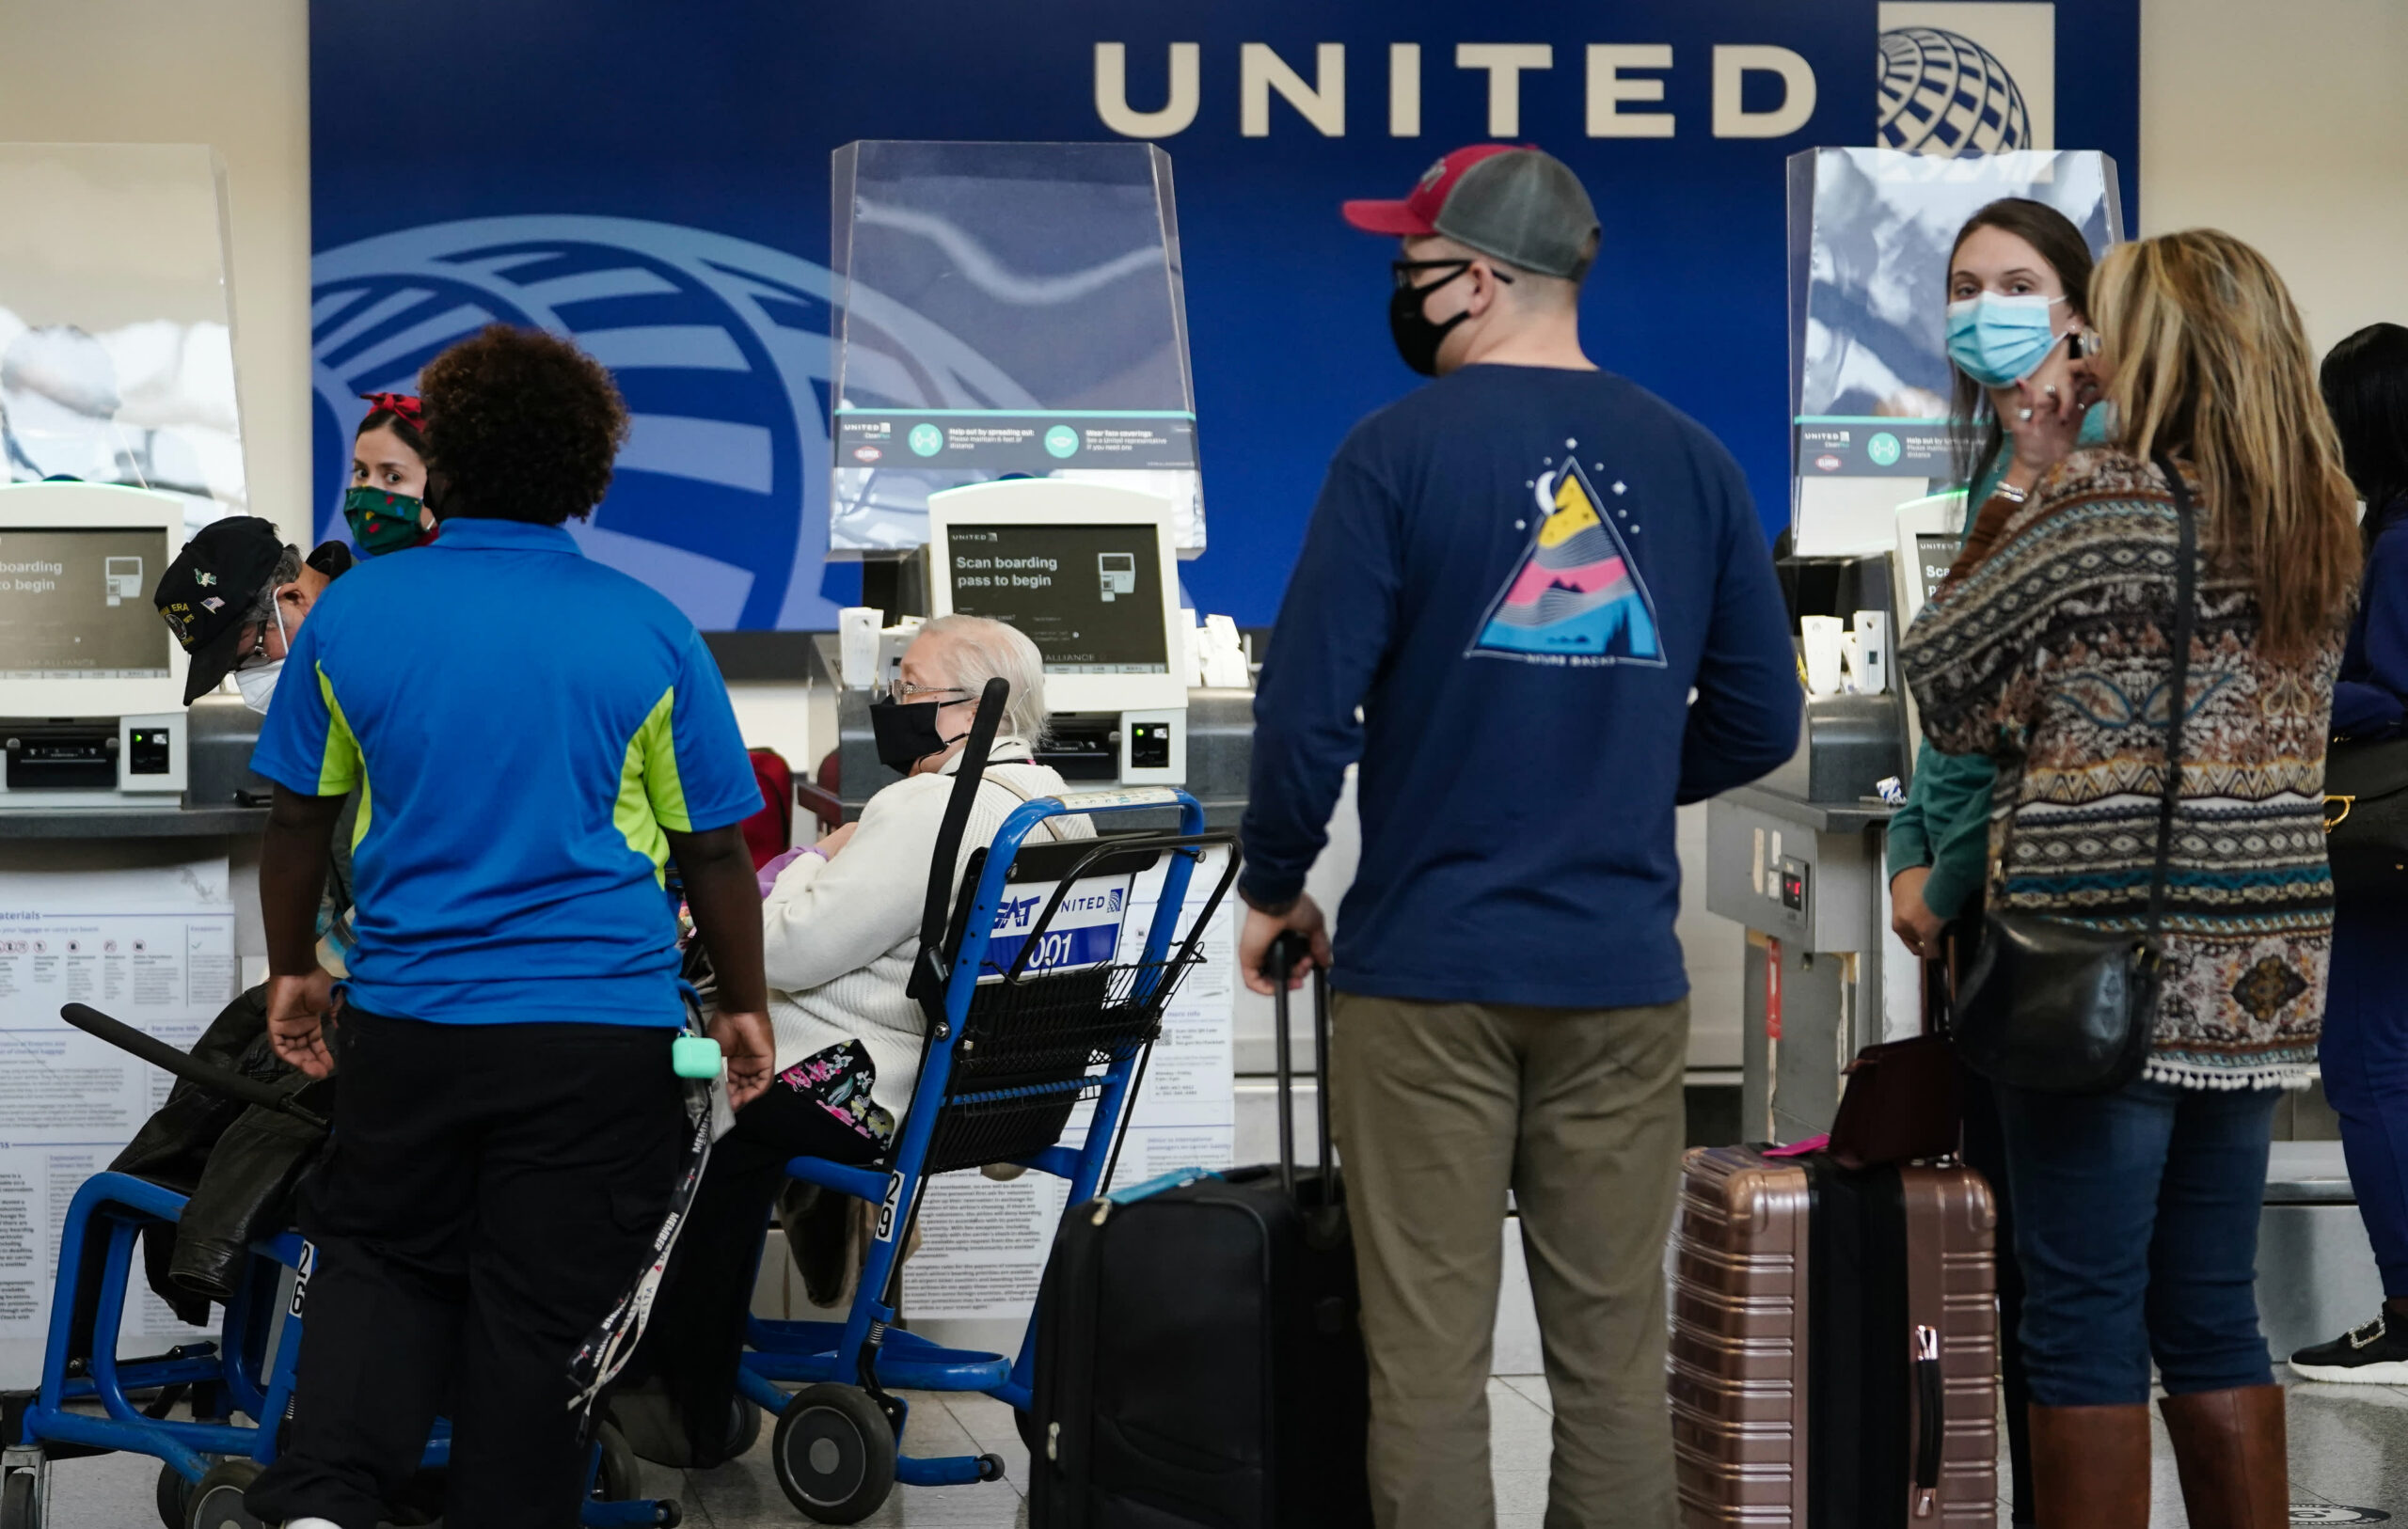 United cuts flights as about 3,000 workers call out sick from Covid